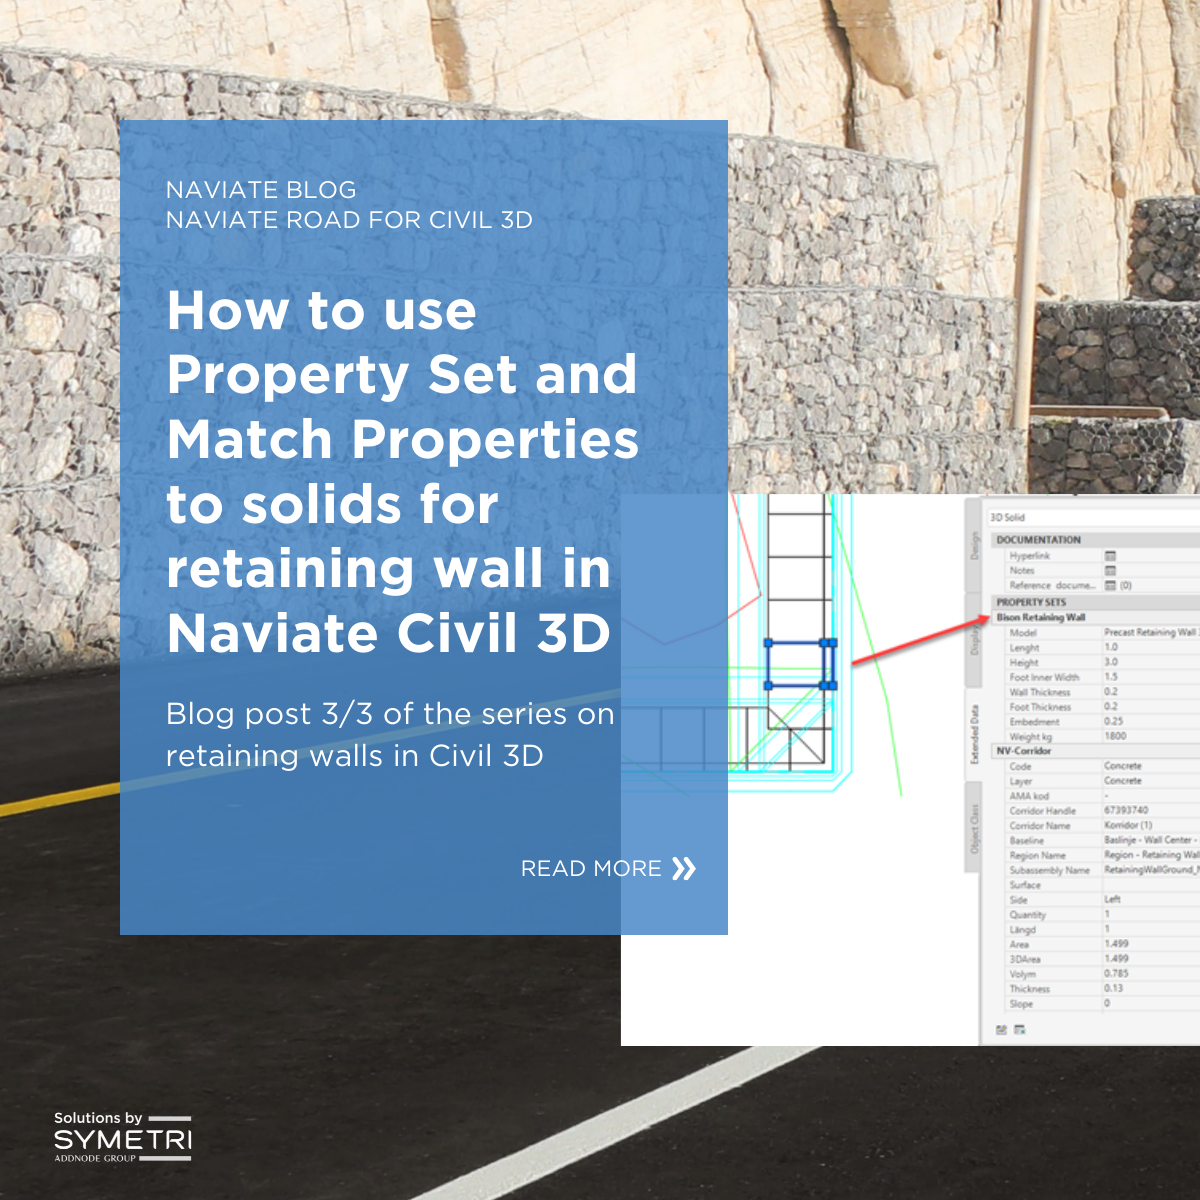 How to use Property Set and Match Properties to solids for retaining wall in Naviate Civil 3D